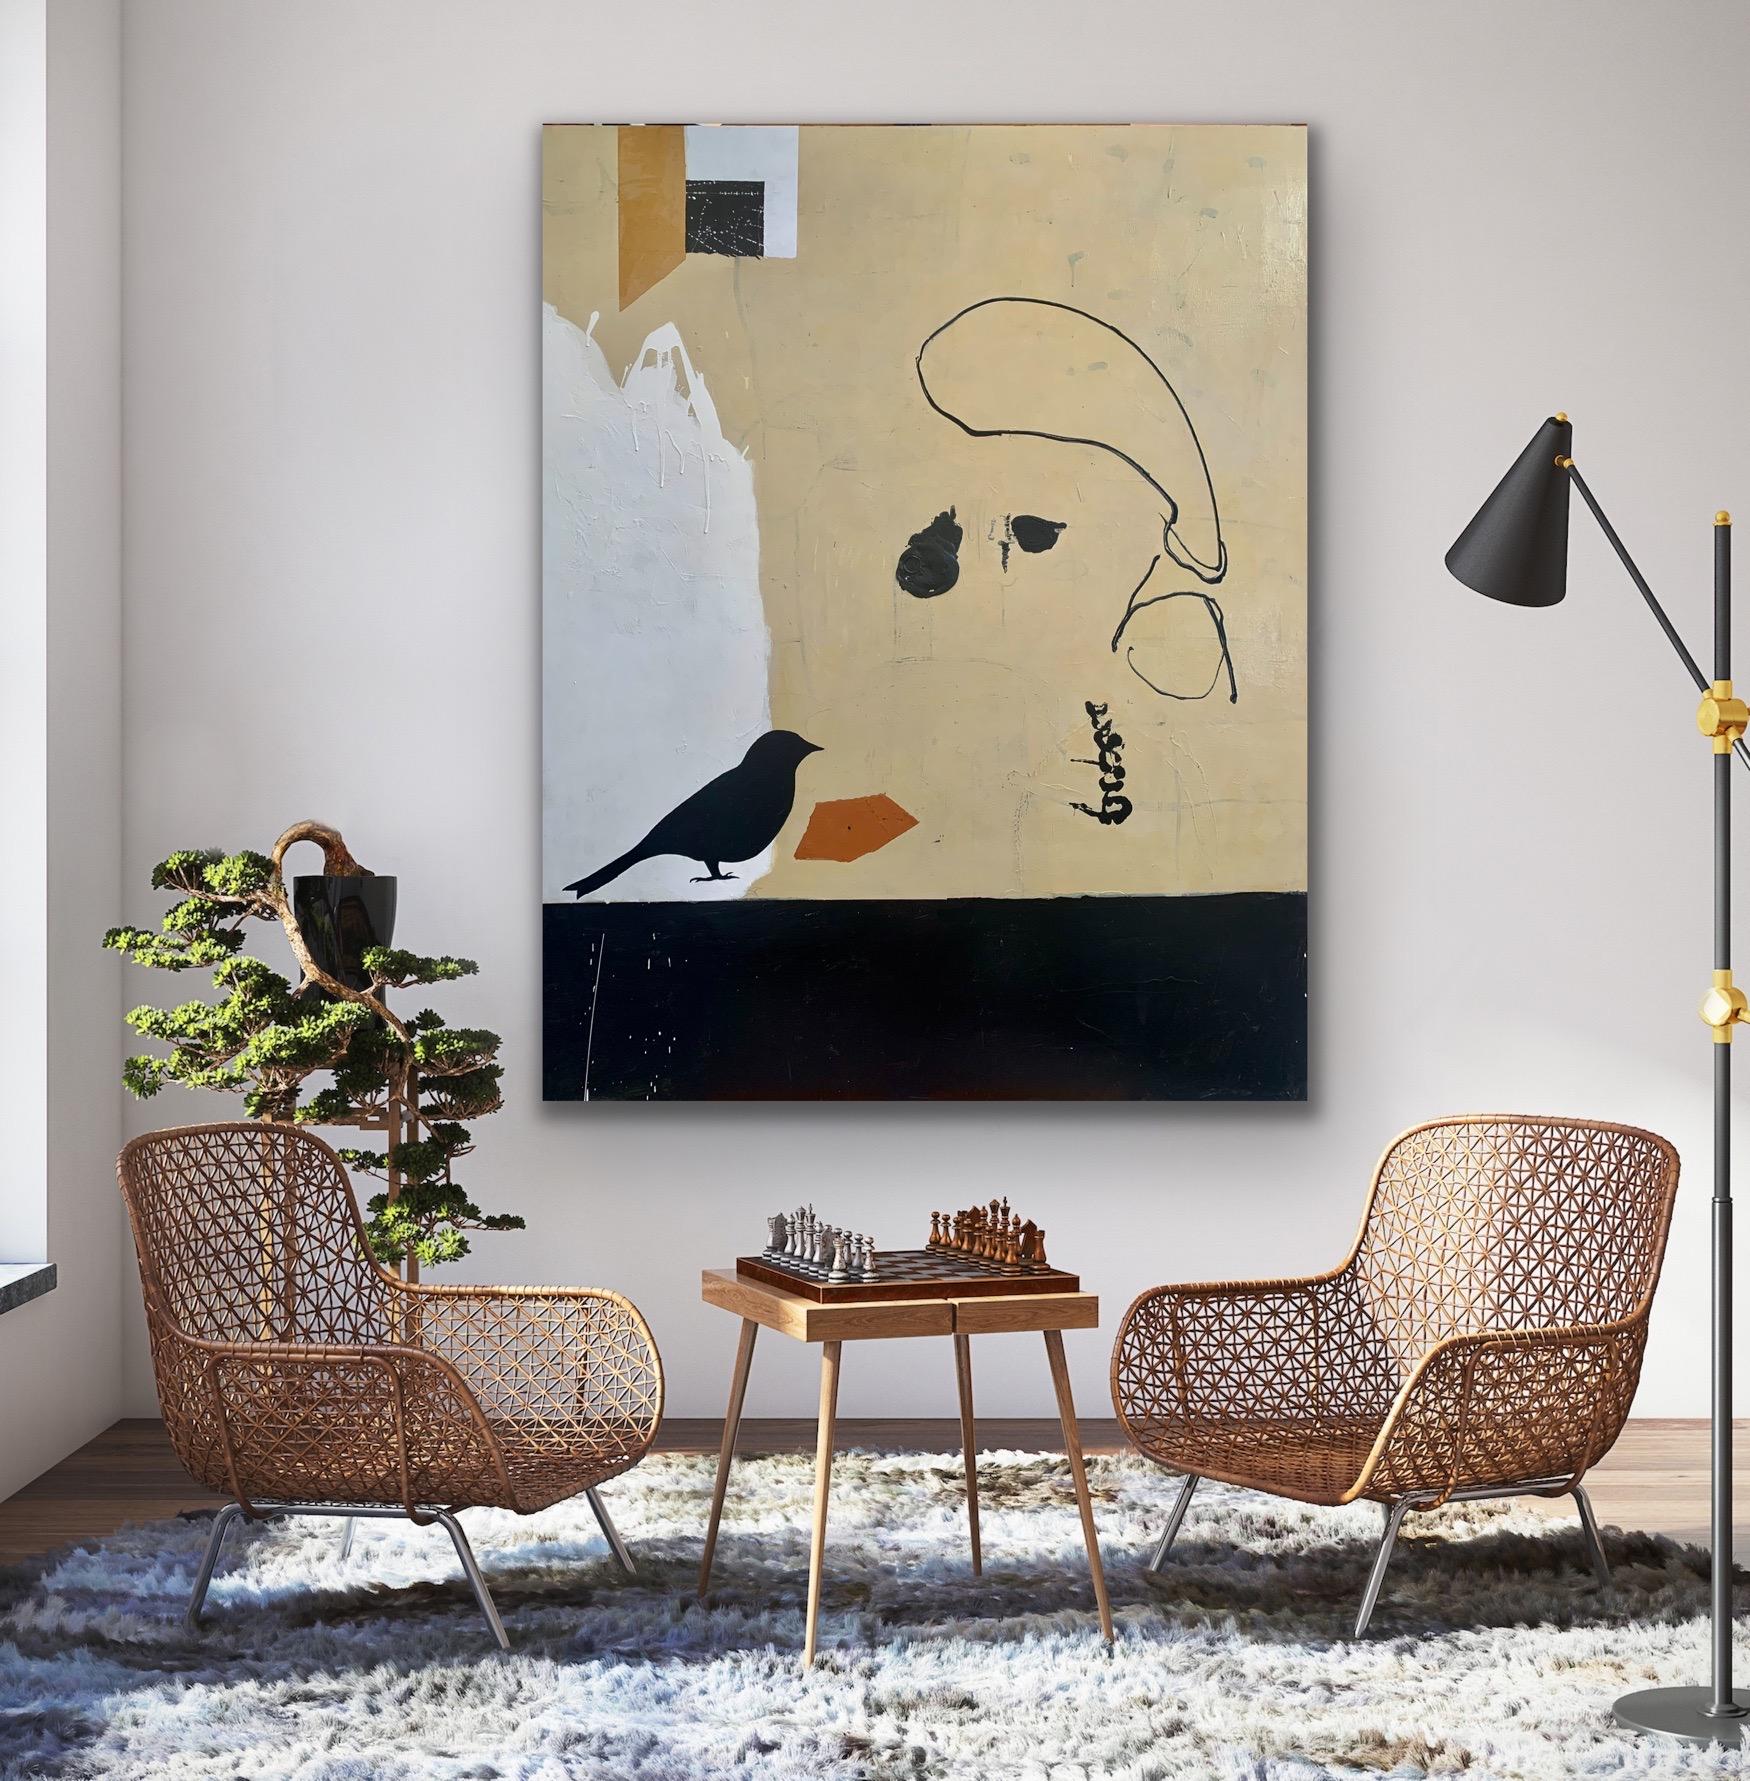 APRIL CREAM - brown, white and black abstract painting with bird - Painting by Silvia Poloto